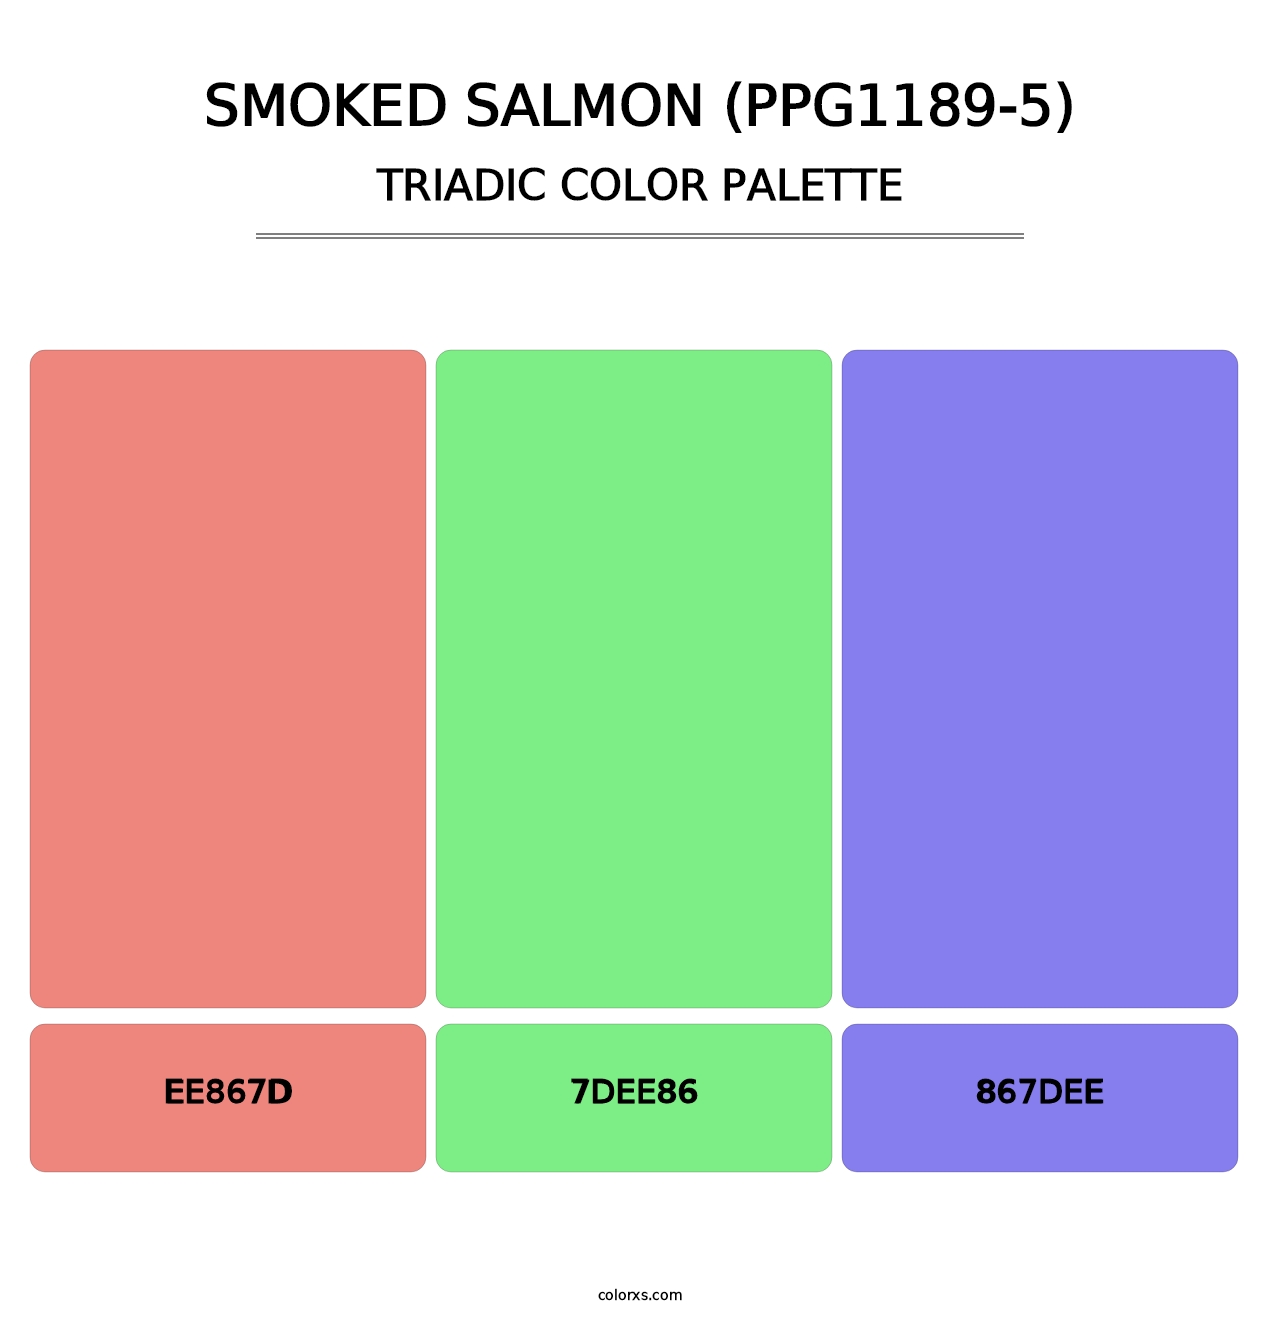 Smoked Salmon (PPG1189-5) - Triadic Color Palette